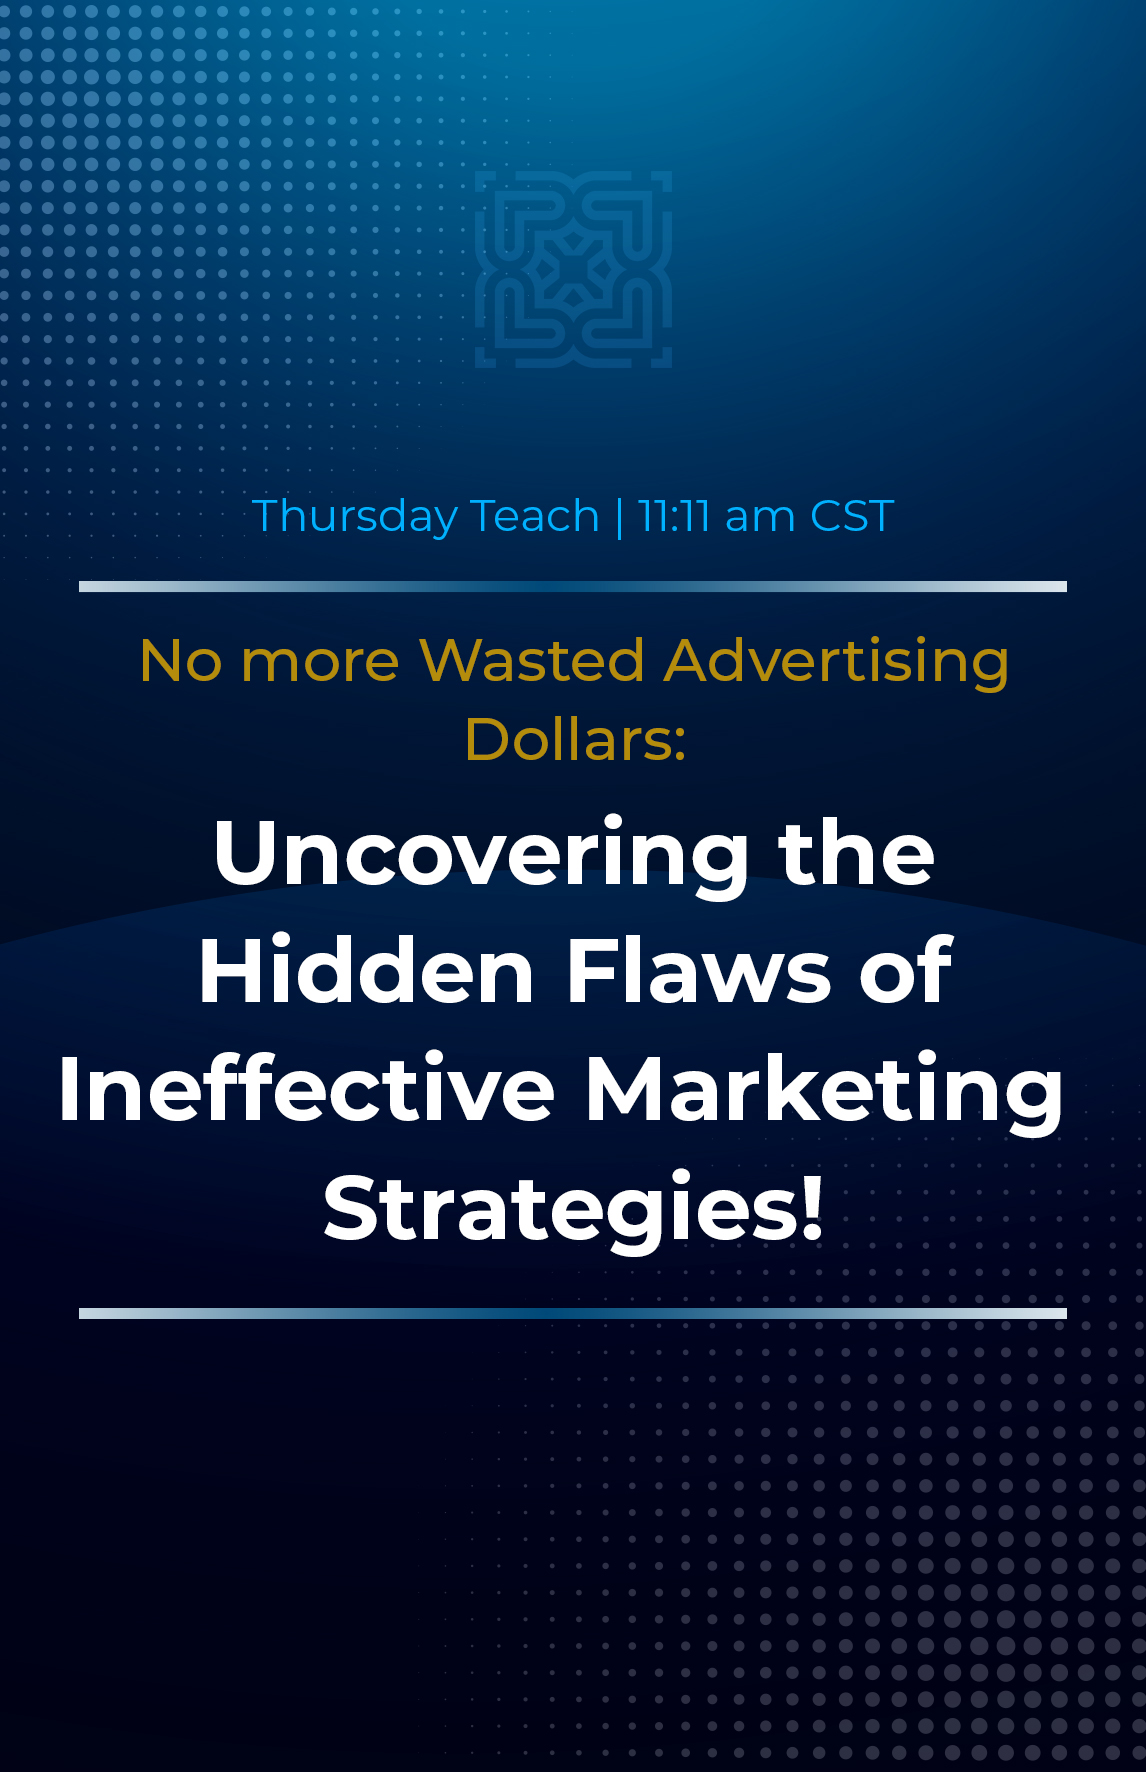 Uncovering the Hidden Flaws of Ineffective Marketing Strategies!